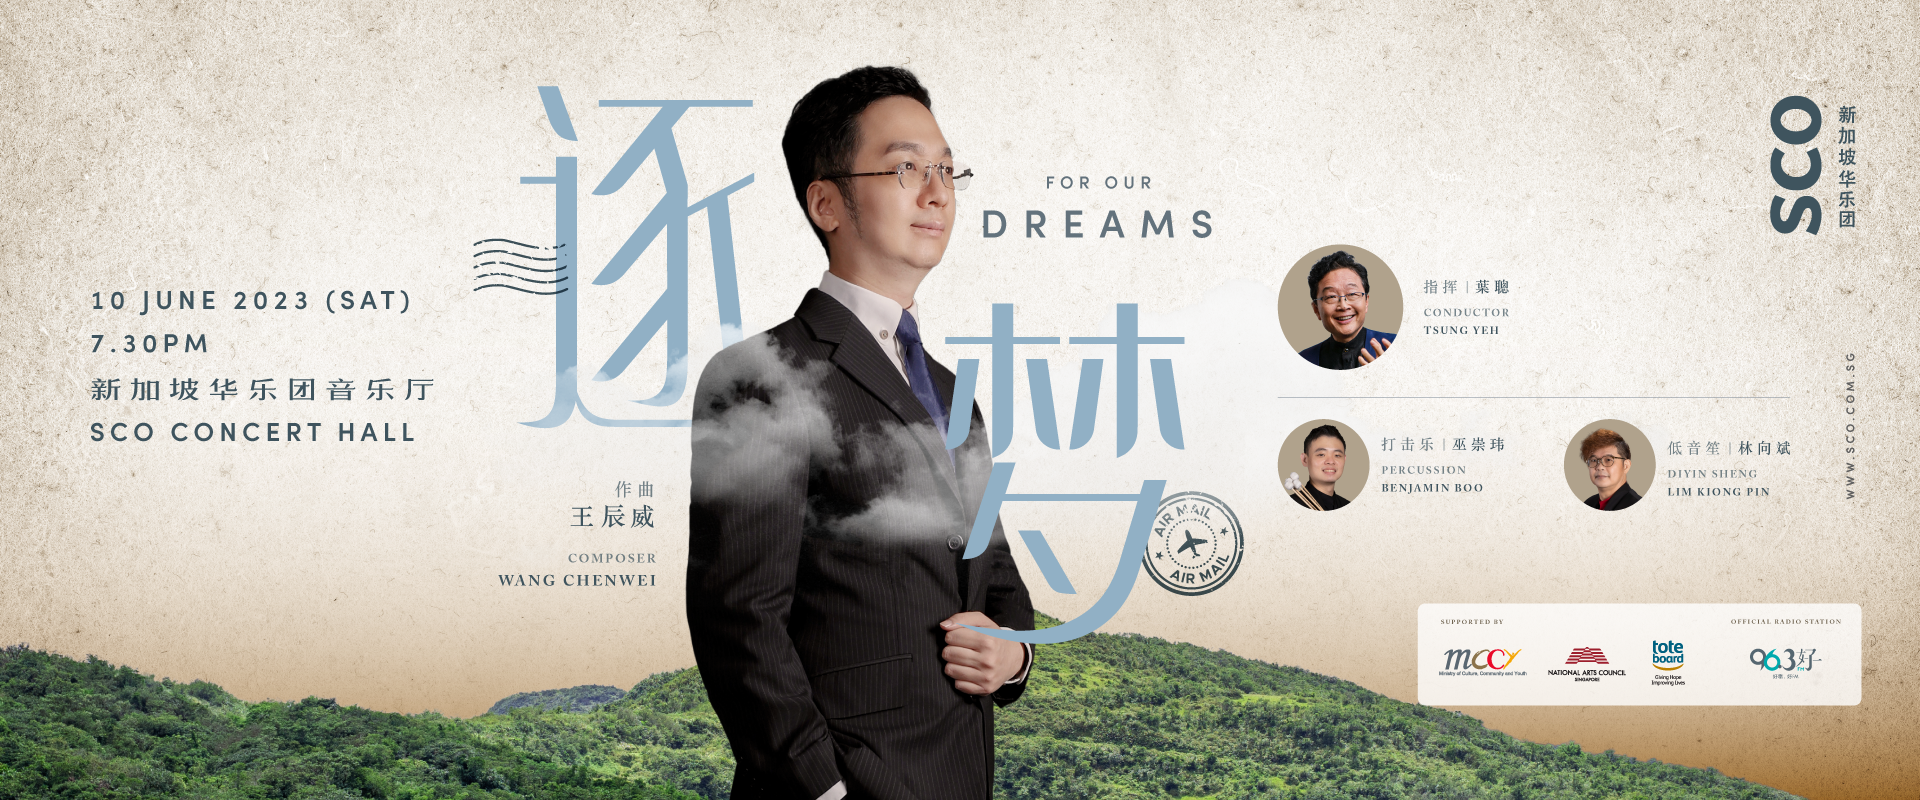 1920x800-homepagebanner For Our Dreams: Wang Chenwei’s Composition Showcase